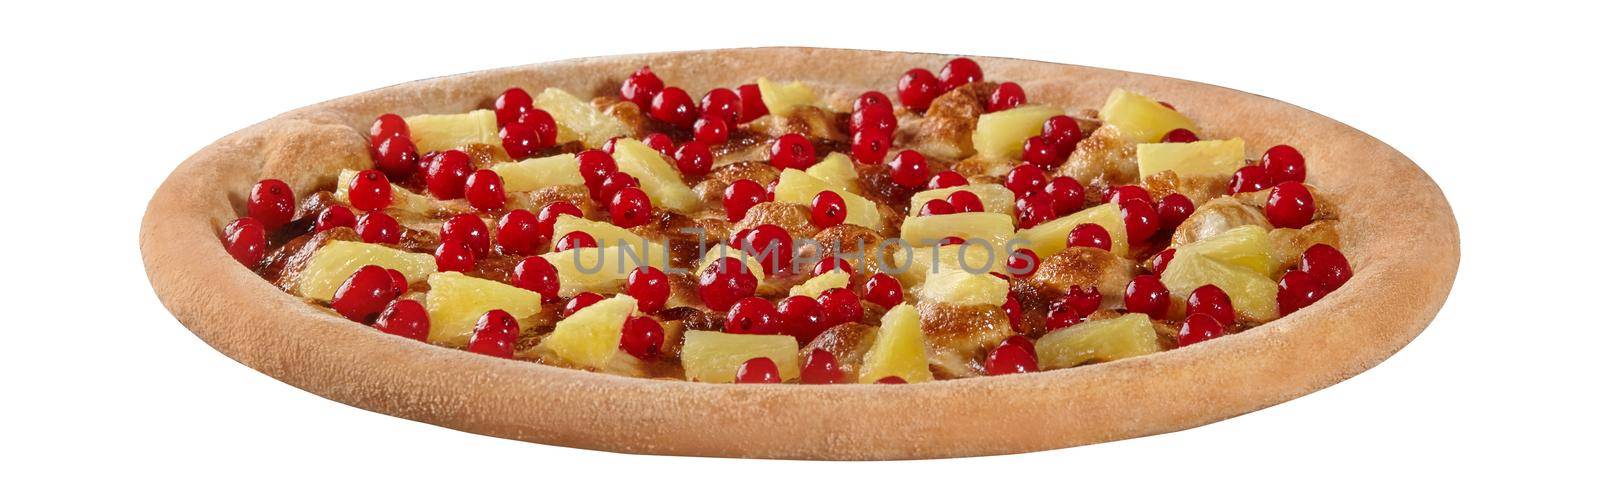 Pizza-shaped open pie with red currants, pineapple, melted mozzarella and condensed milk isolated on white by nazarovsergey